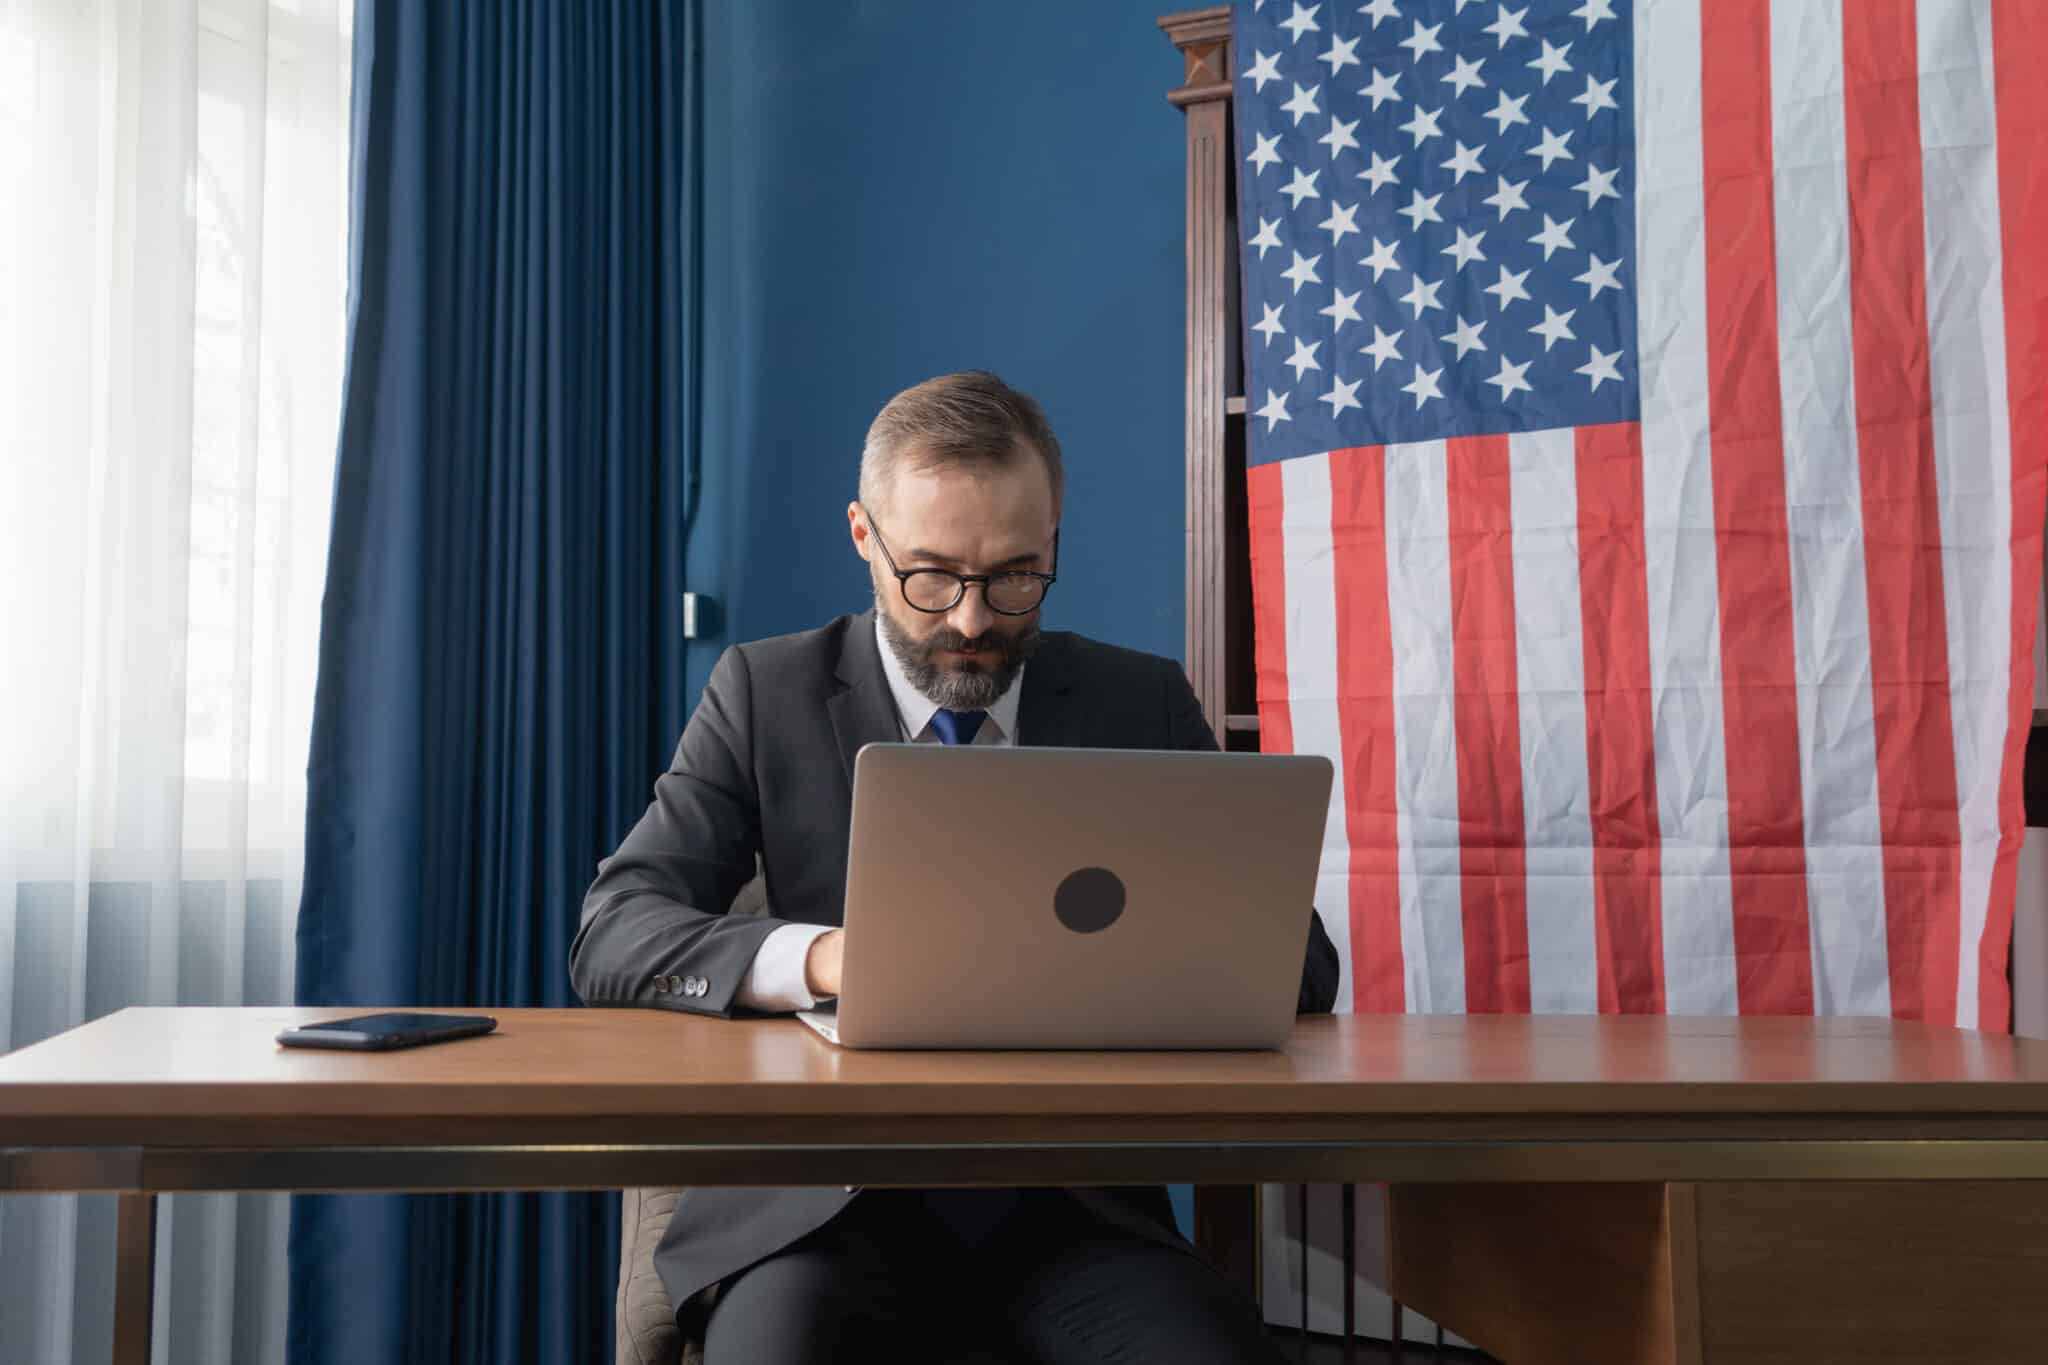 Person sits at a desk with an open laptop and United States flag behind them.